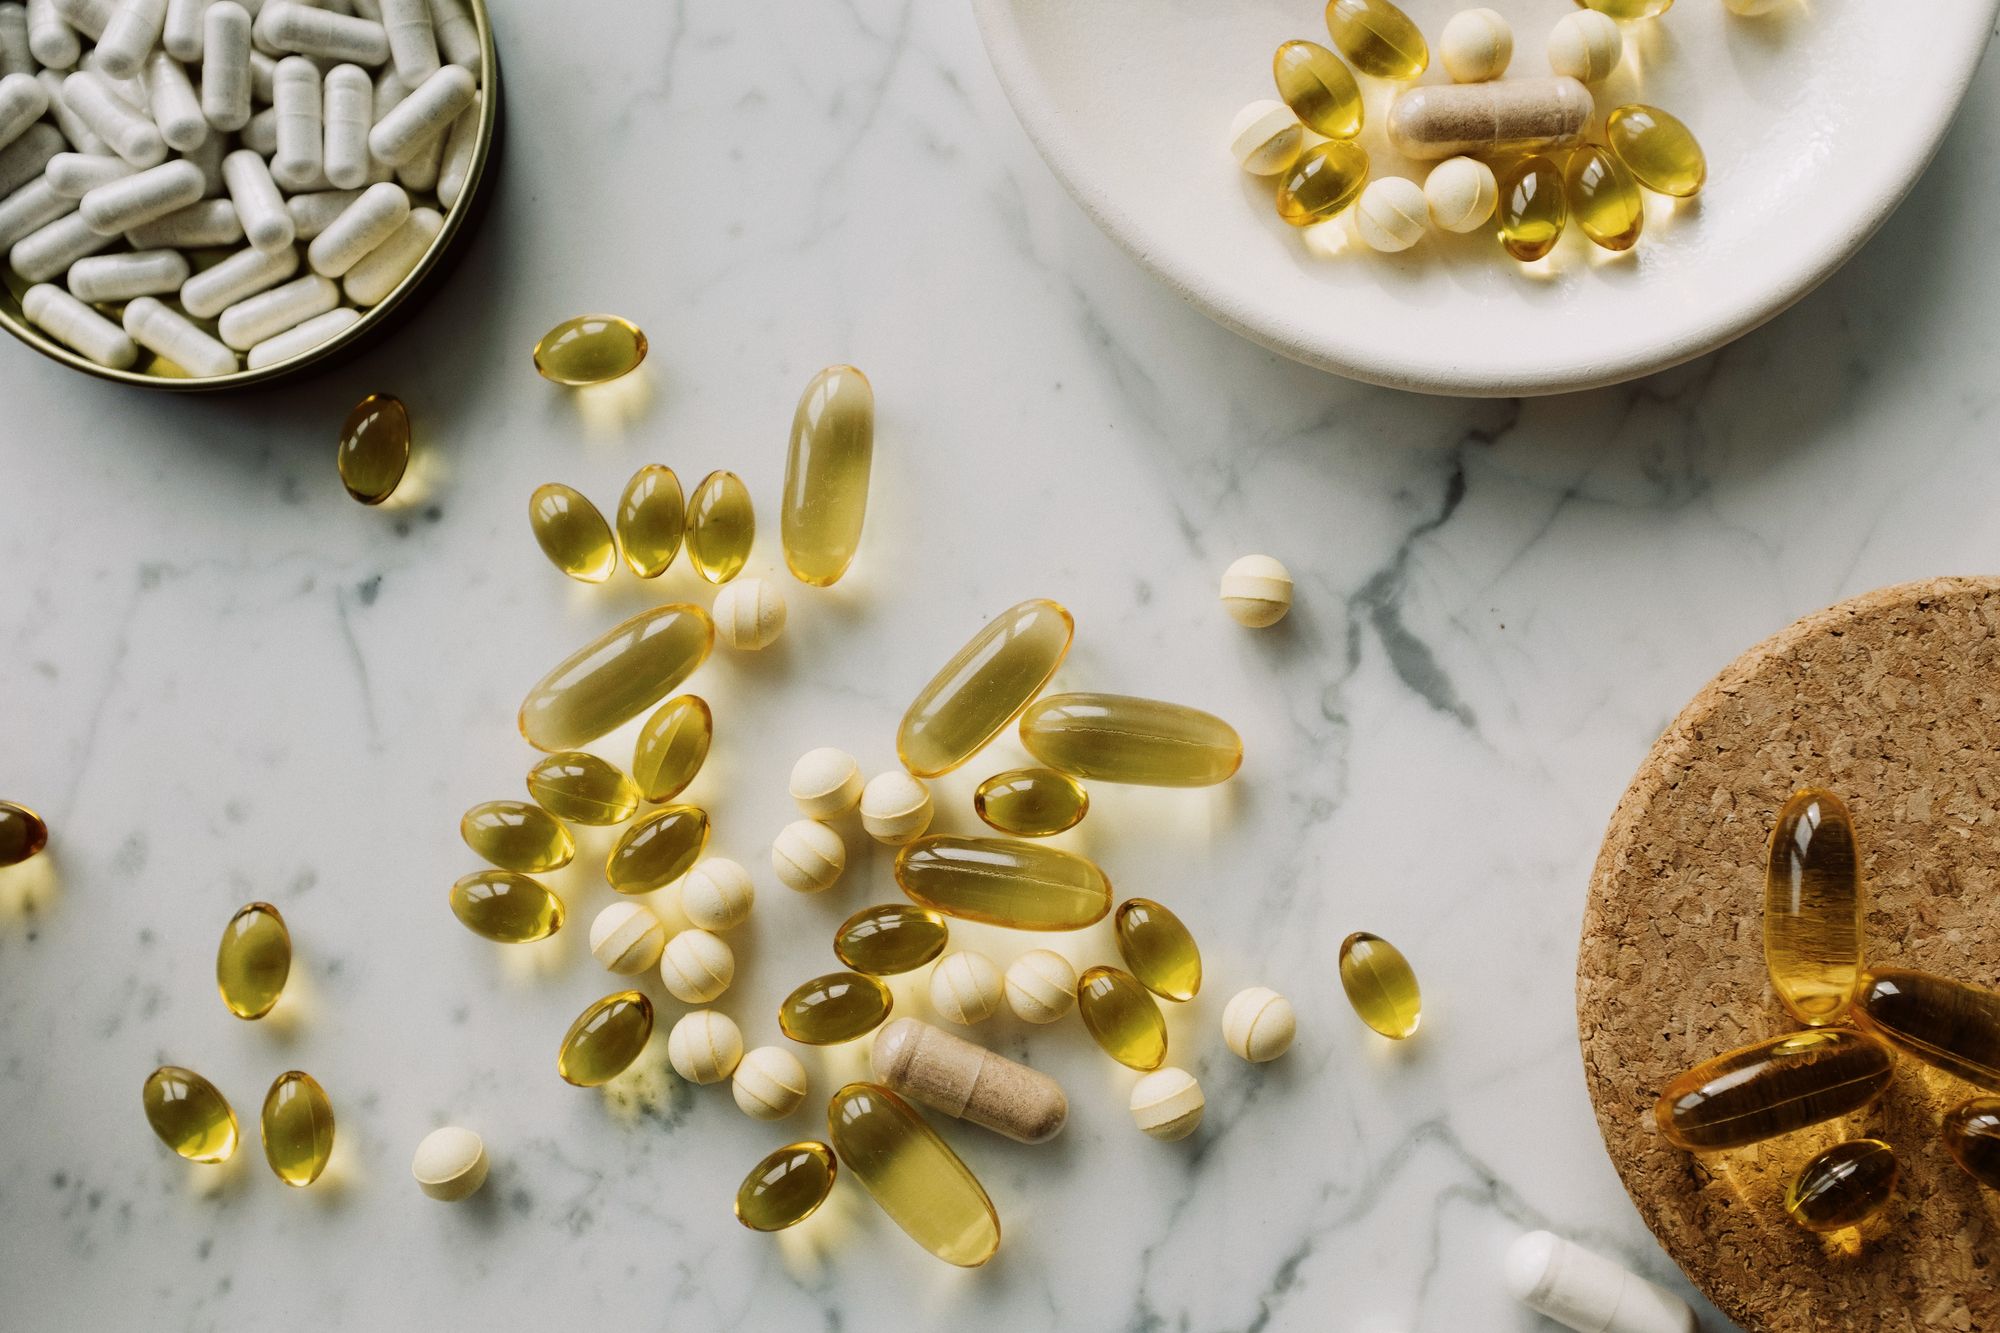 Multivitamins: Importance and How to Choose the Best For You